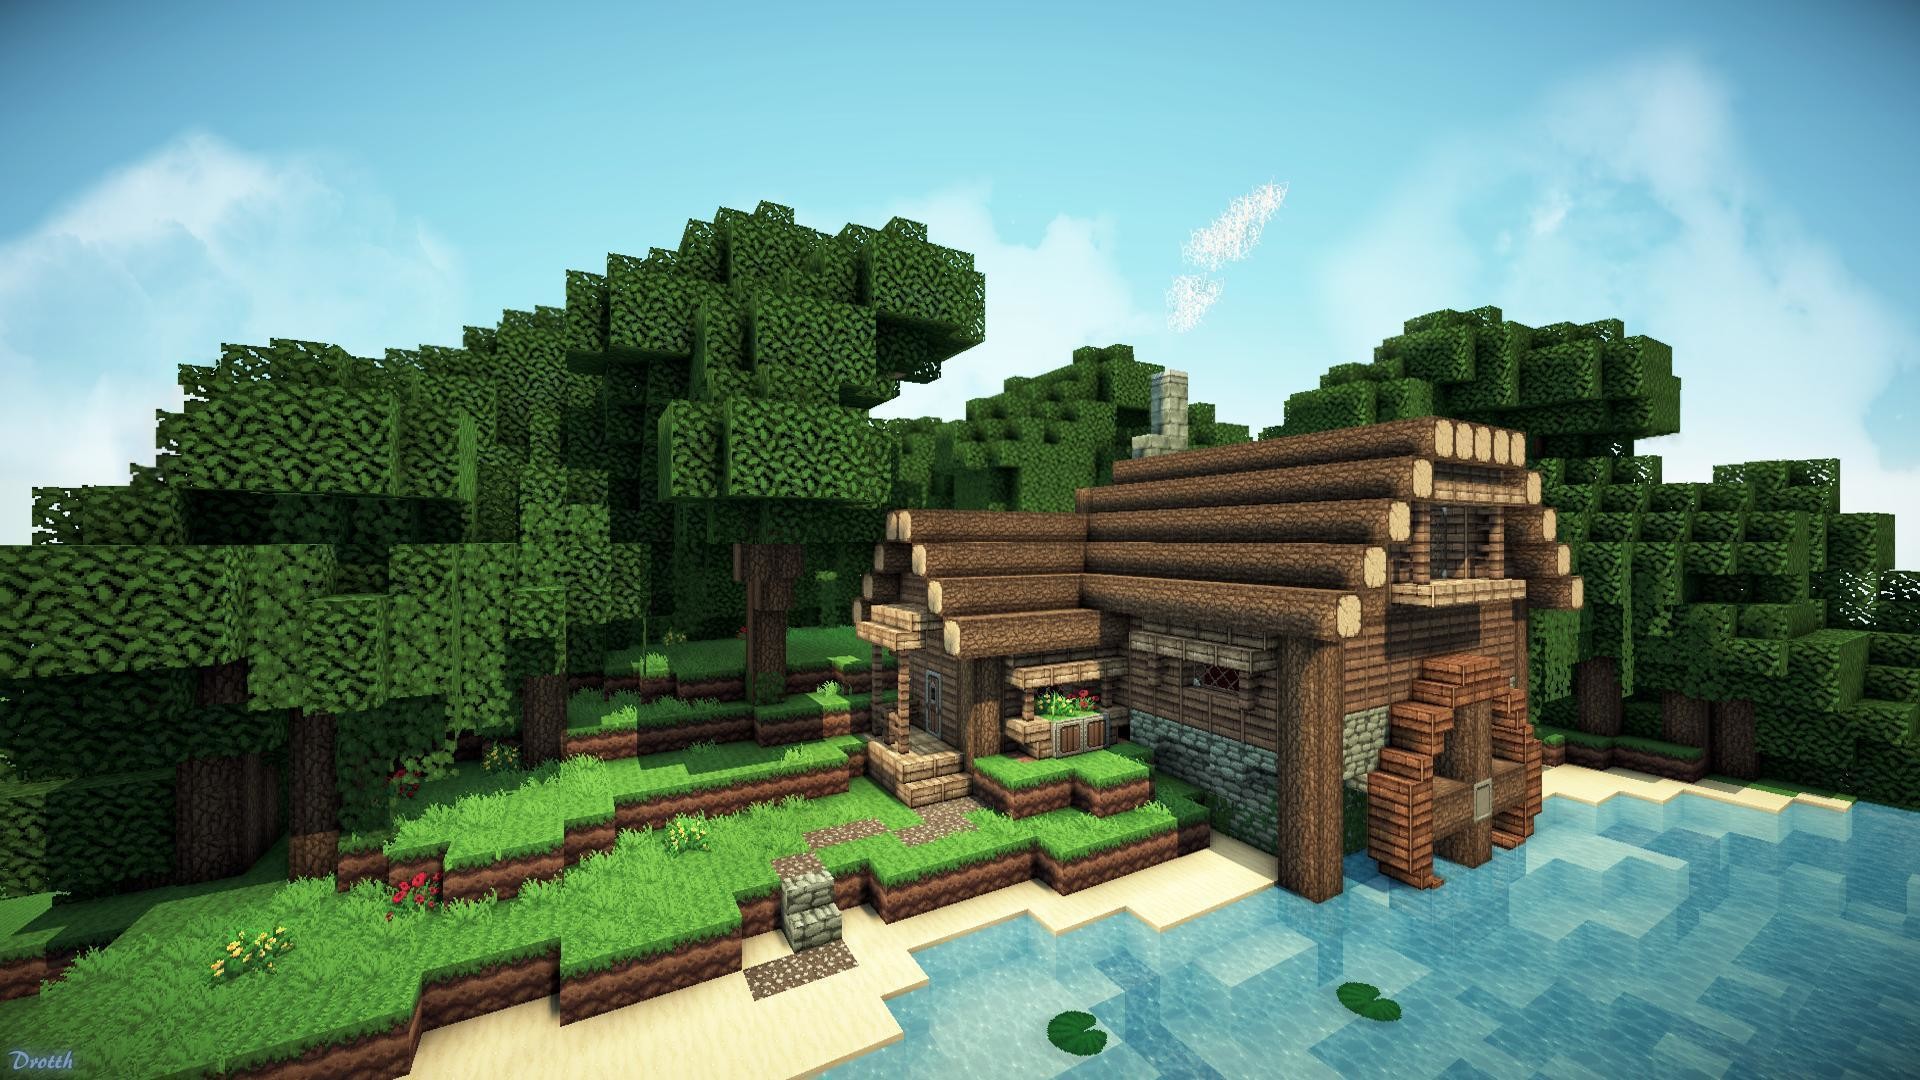 Epic Minecraft Backgrounds (72+ images)